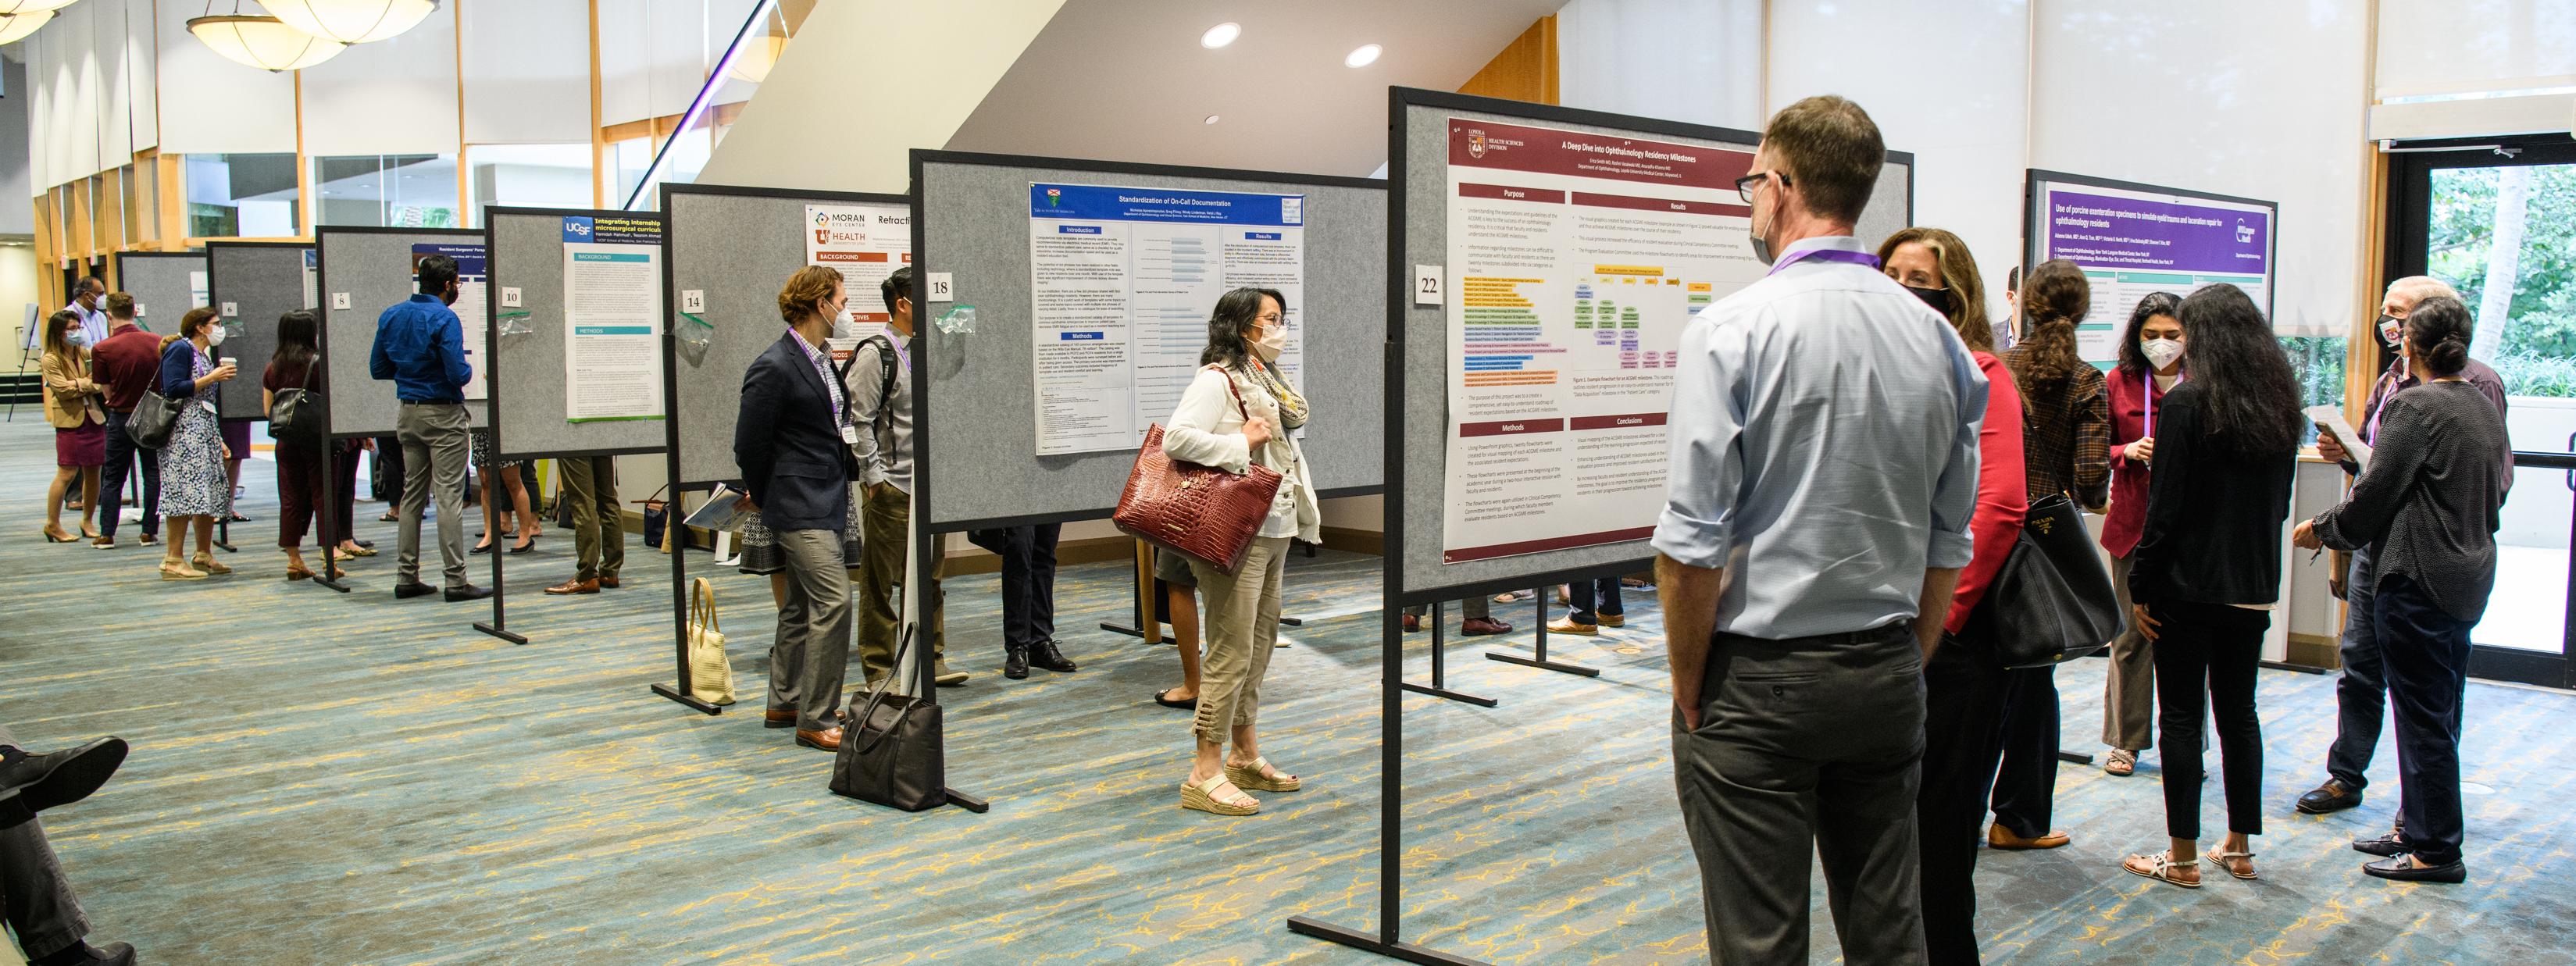 AUPO 2022 Annual Meeting Posters